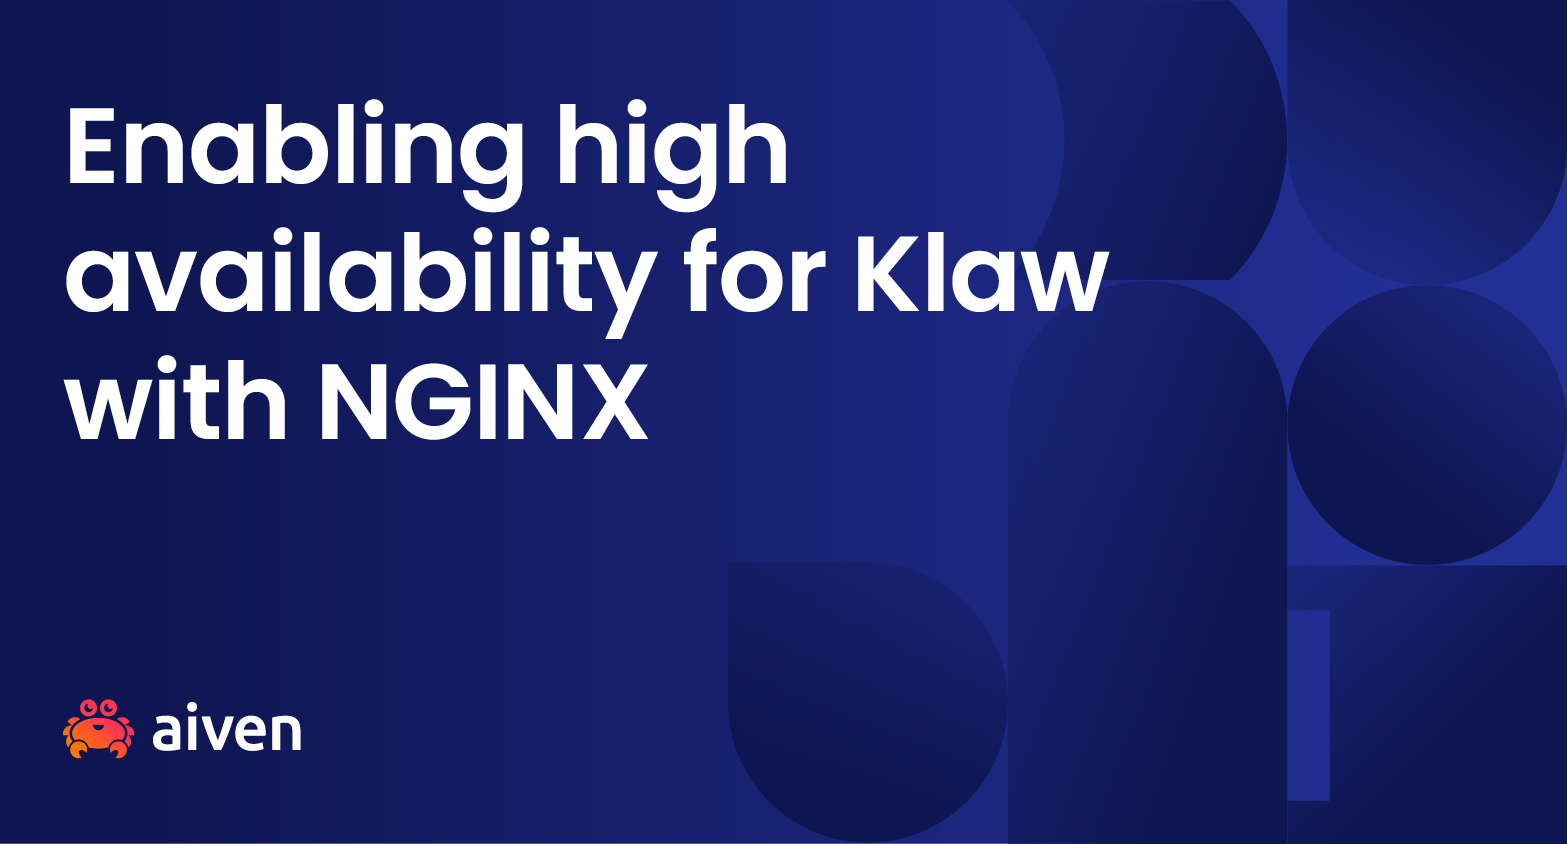 Enabling high availability for Klaw with NGINX